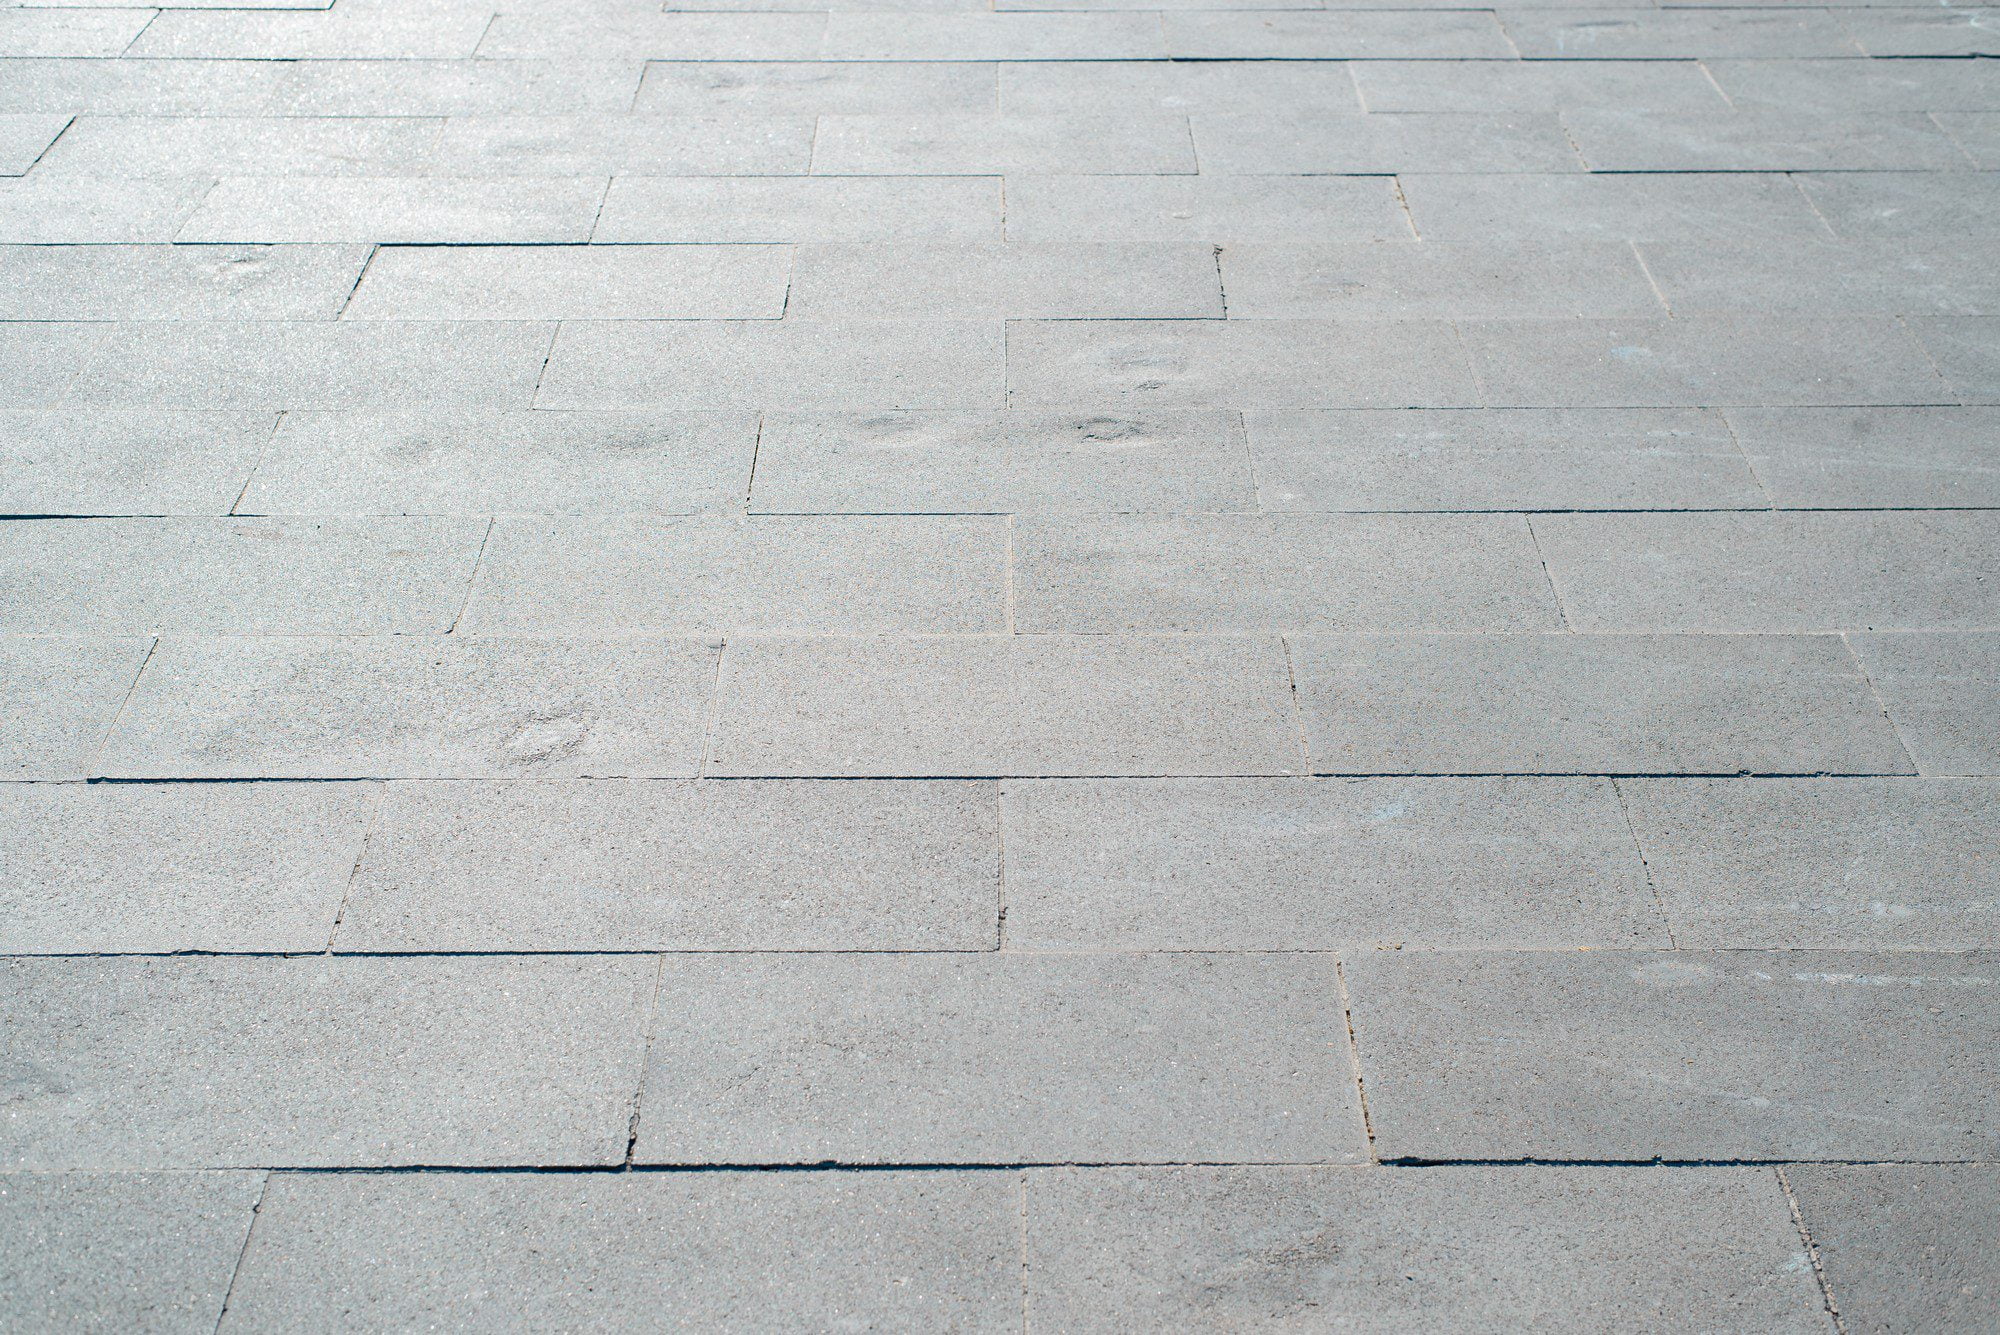 This image shows a paved area with a pattern of rectangular stone or concrete paving slabs. The slabs are arranged in a staggered joint pattern, which often provides visual interest and structural stability to the paved surface. The pavement appears to be outdoors due to the lighting and shadows, and it is common in public spaces such as squares, walkways, or patios. The image does not include any people or distinct objects, focusing primarily on the pattern and texture of the paved ground.